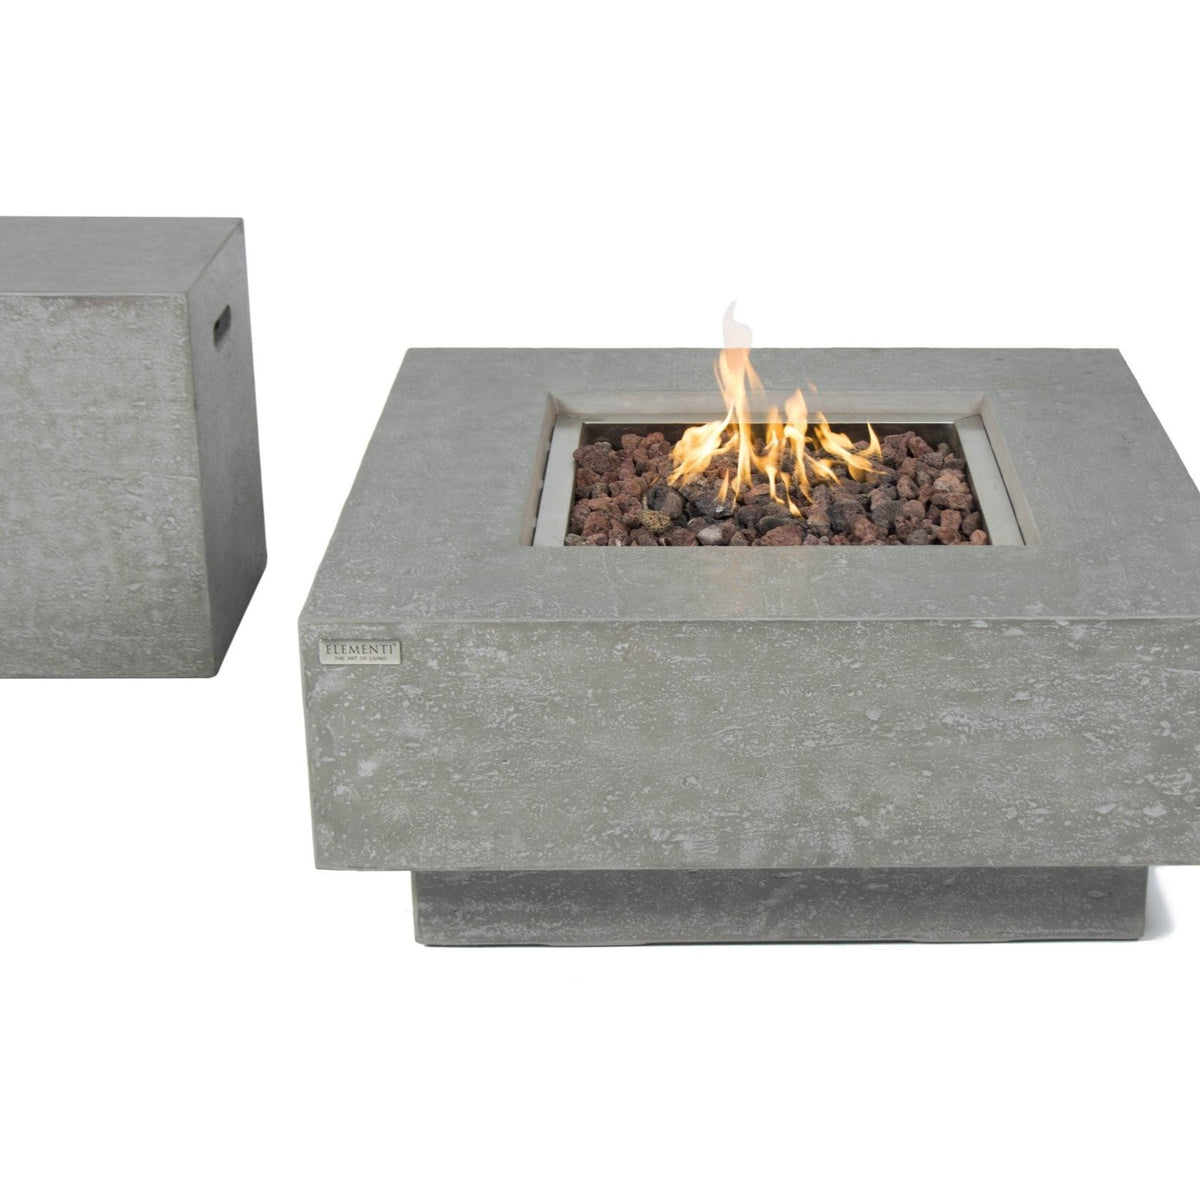 Elementi Manhattan Fire Pit Table in Light Gray with tank cover